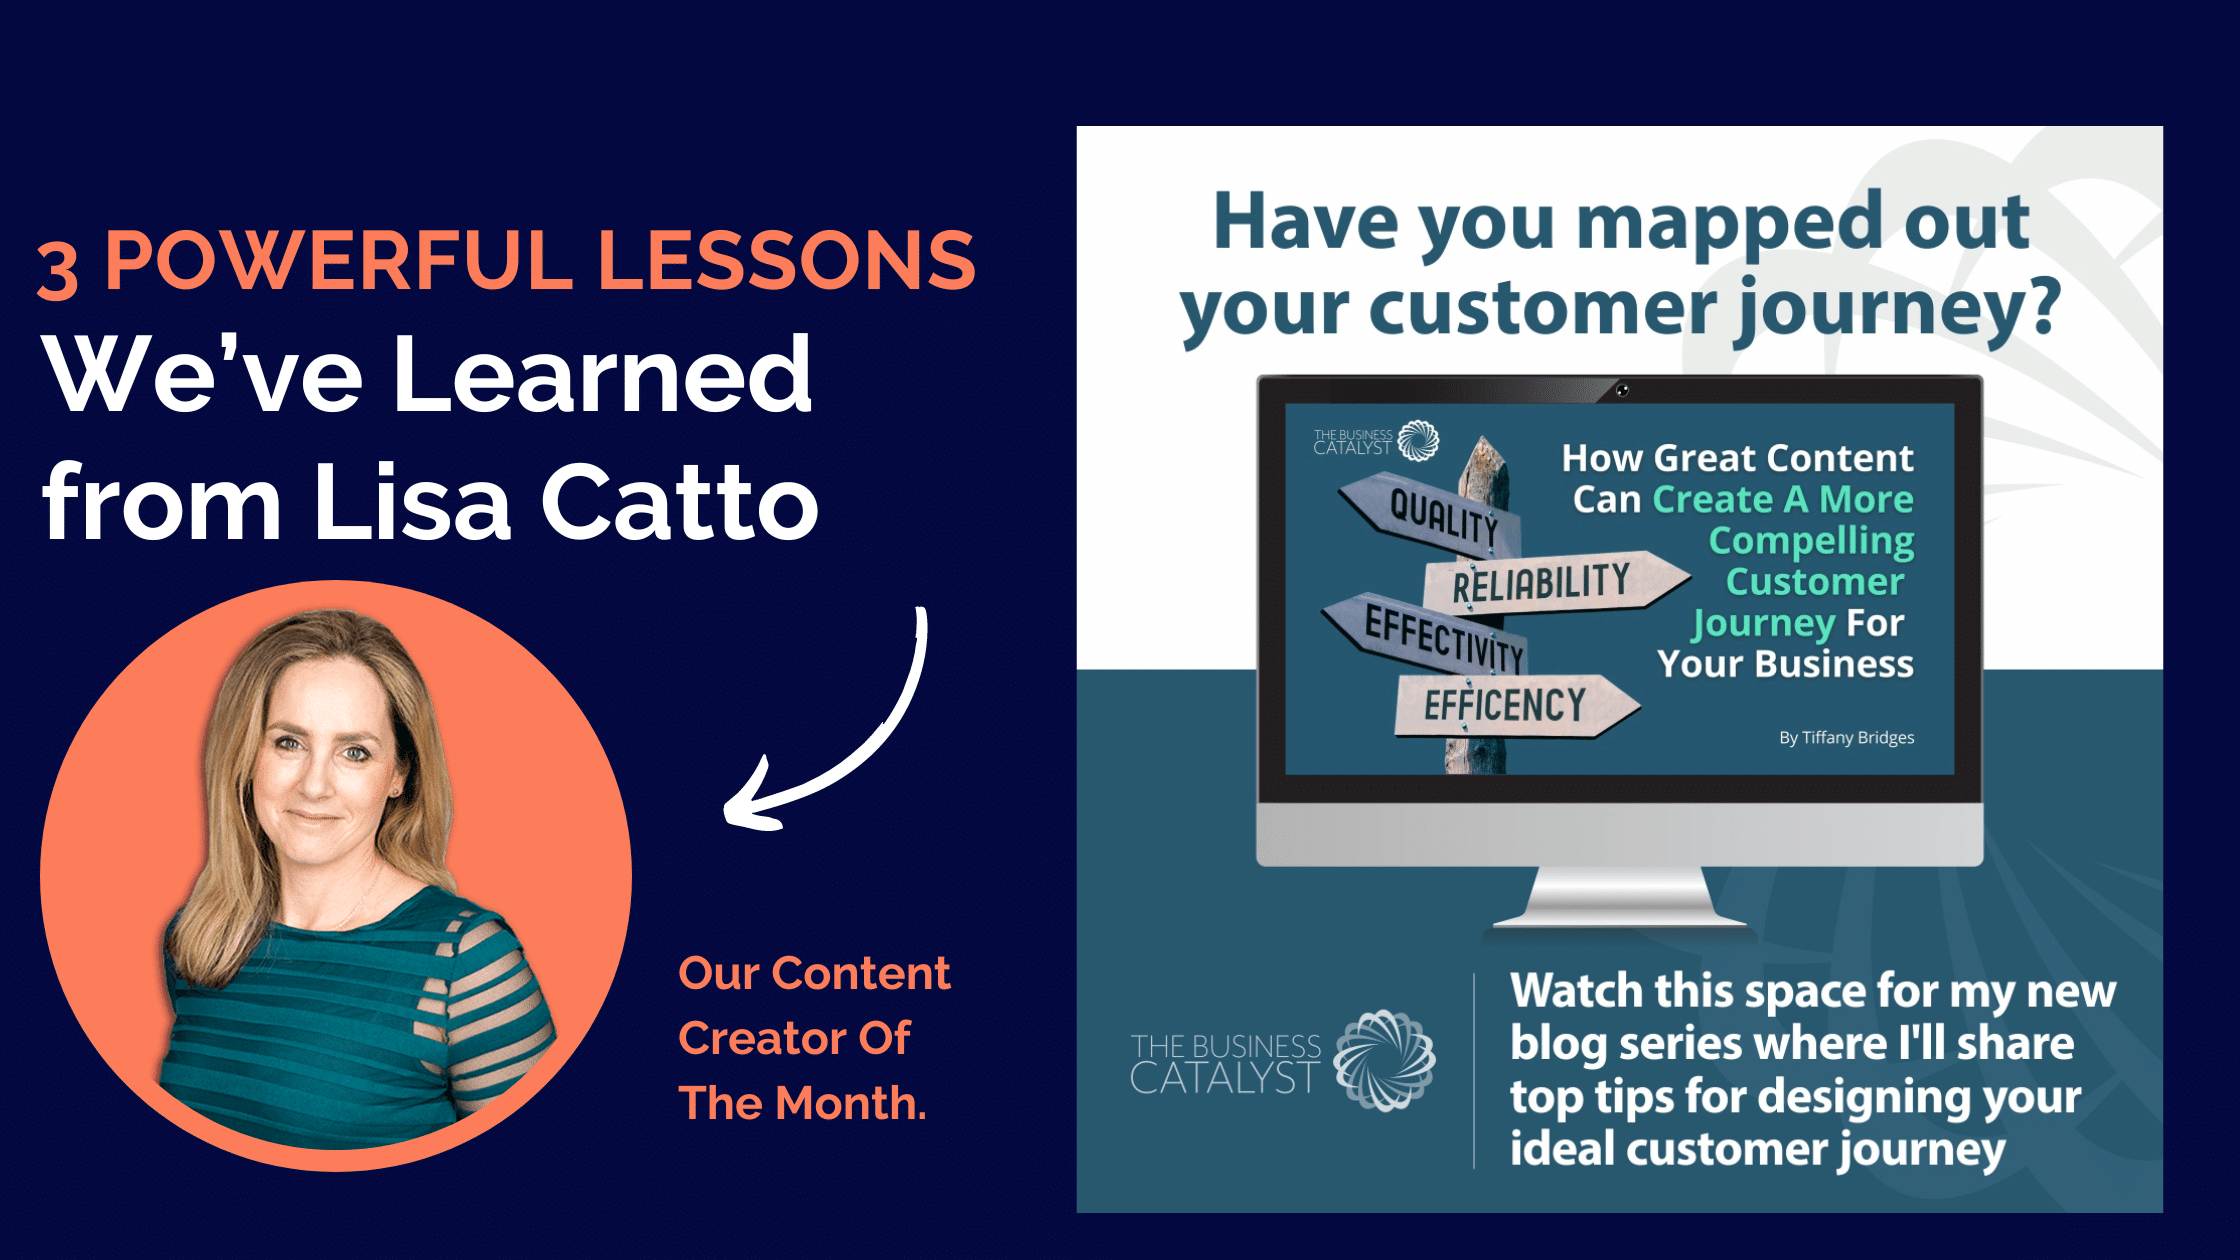 3 Powerful Lessons We’ve Learned From Lisa Catto, Our Content Creator Of The Month